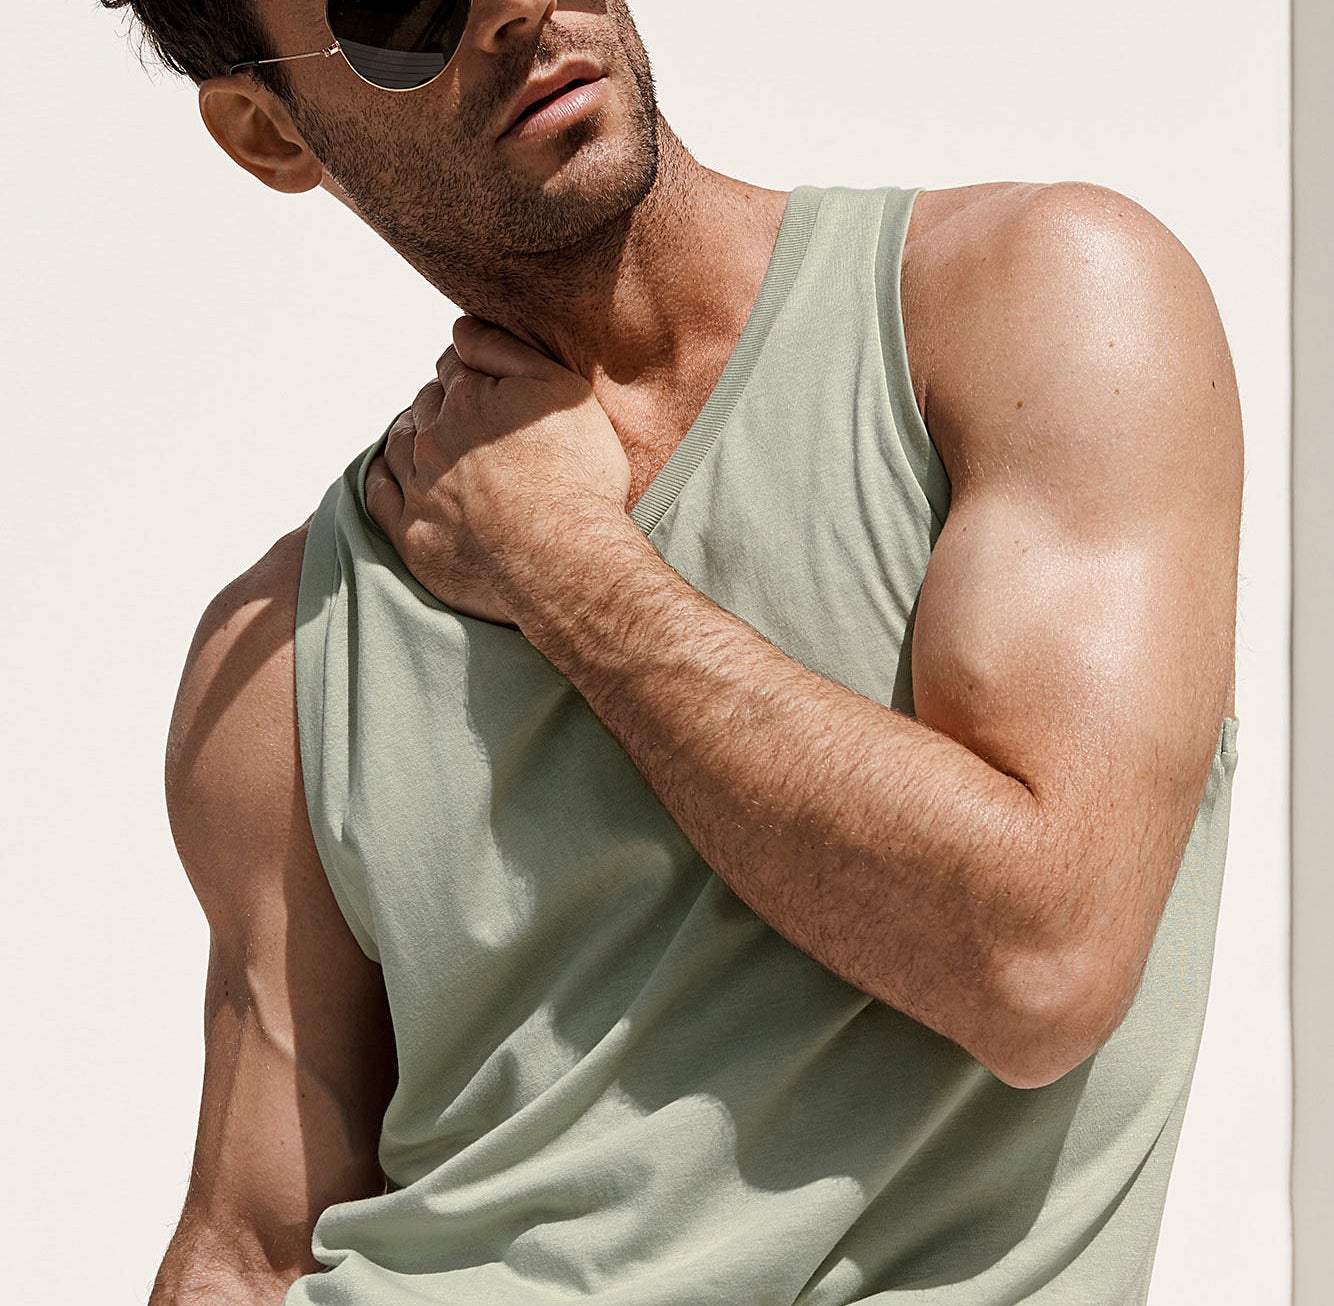 A person wearing the sunglasses and a tank top